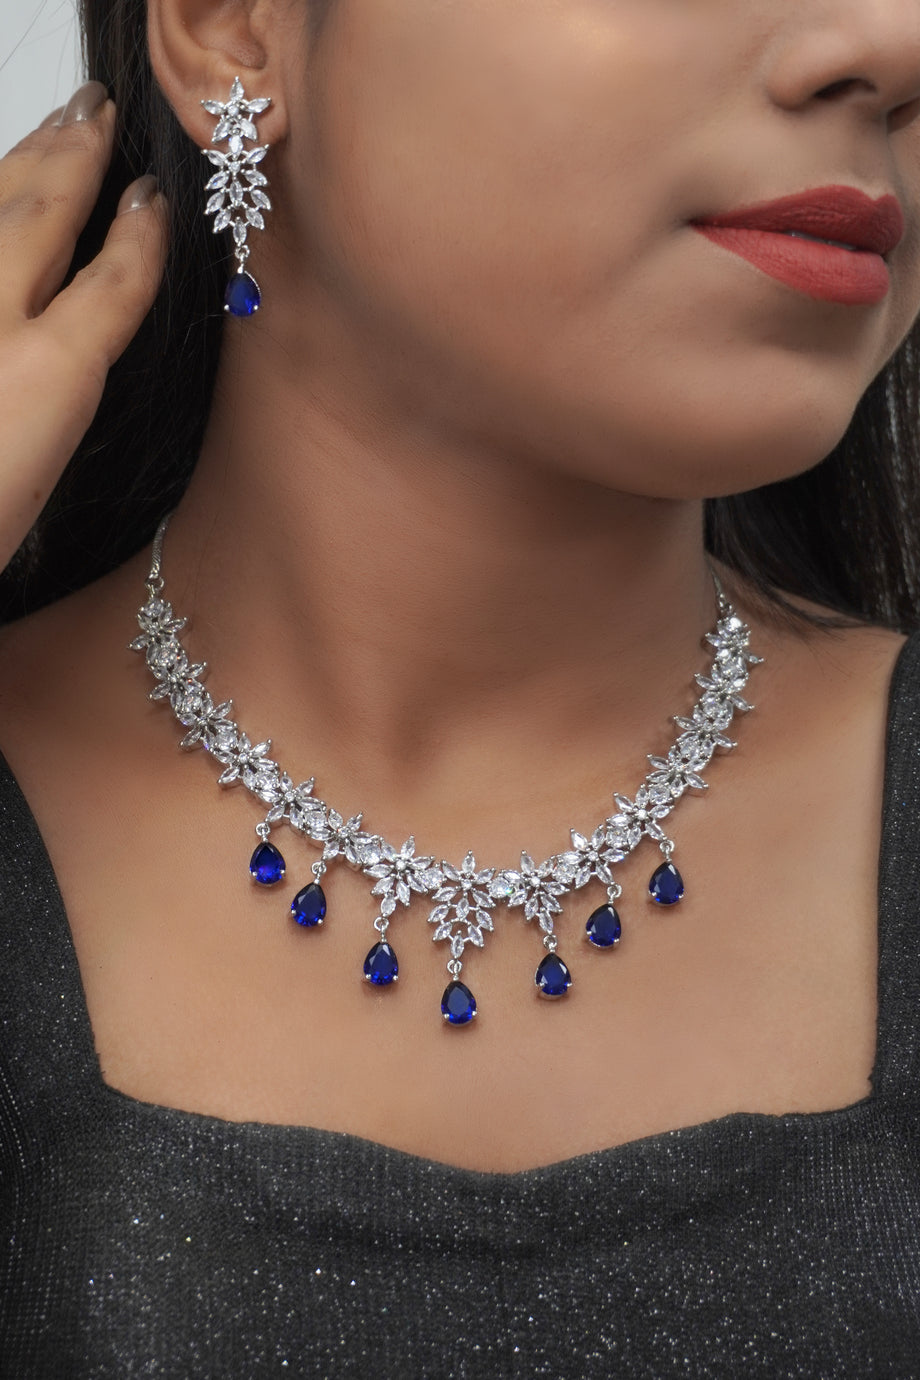 Sapphire Necklace with American Diamonds by NisckaAd Necklace Set